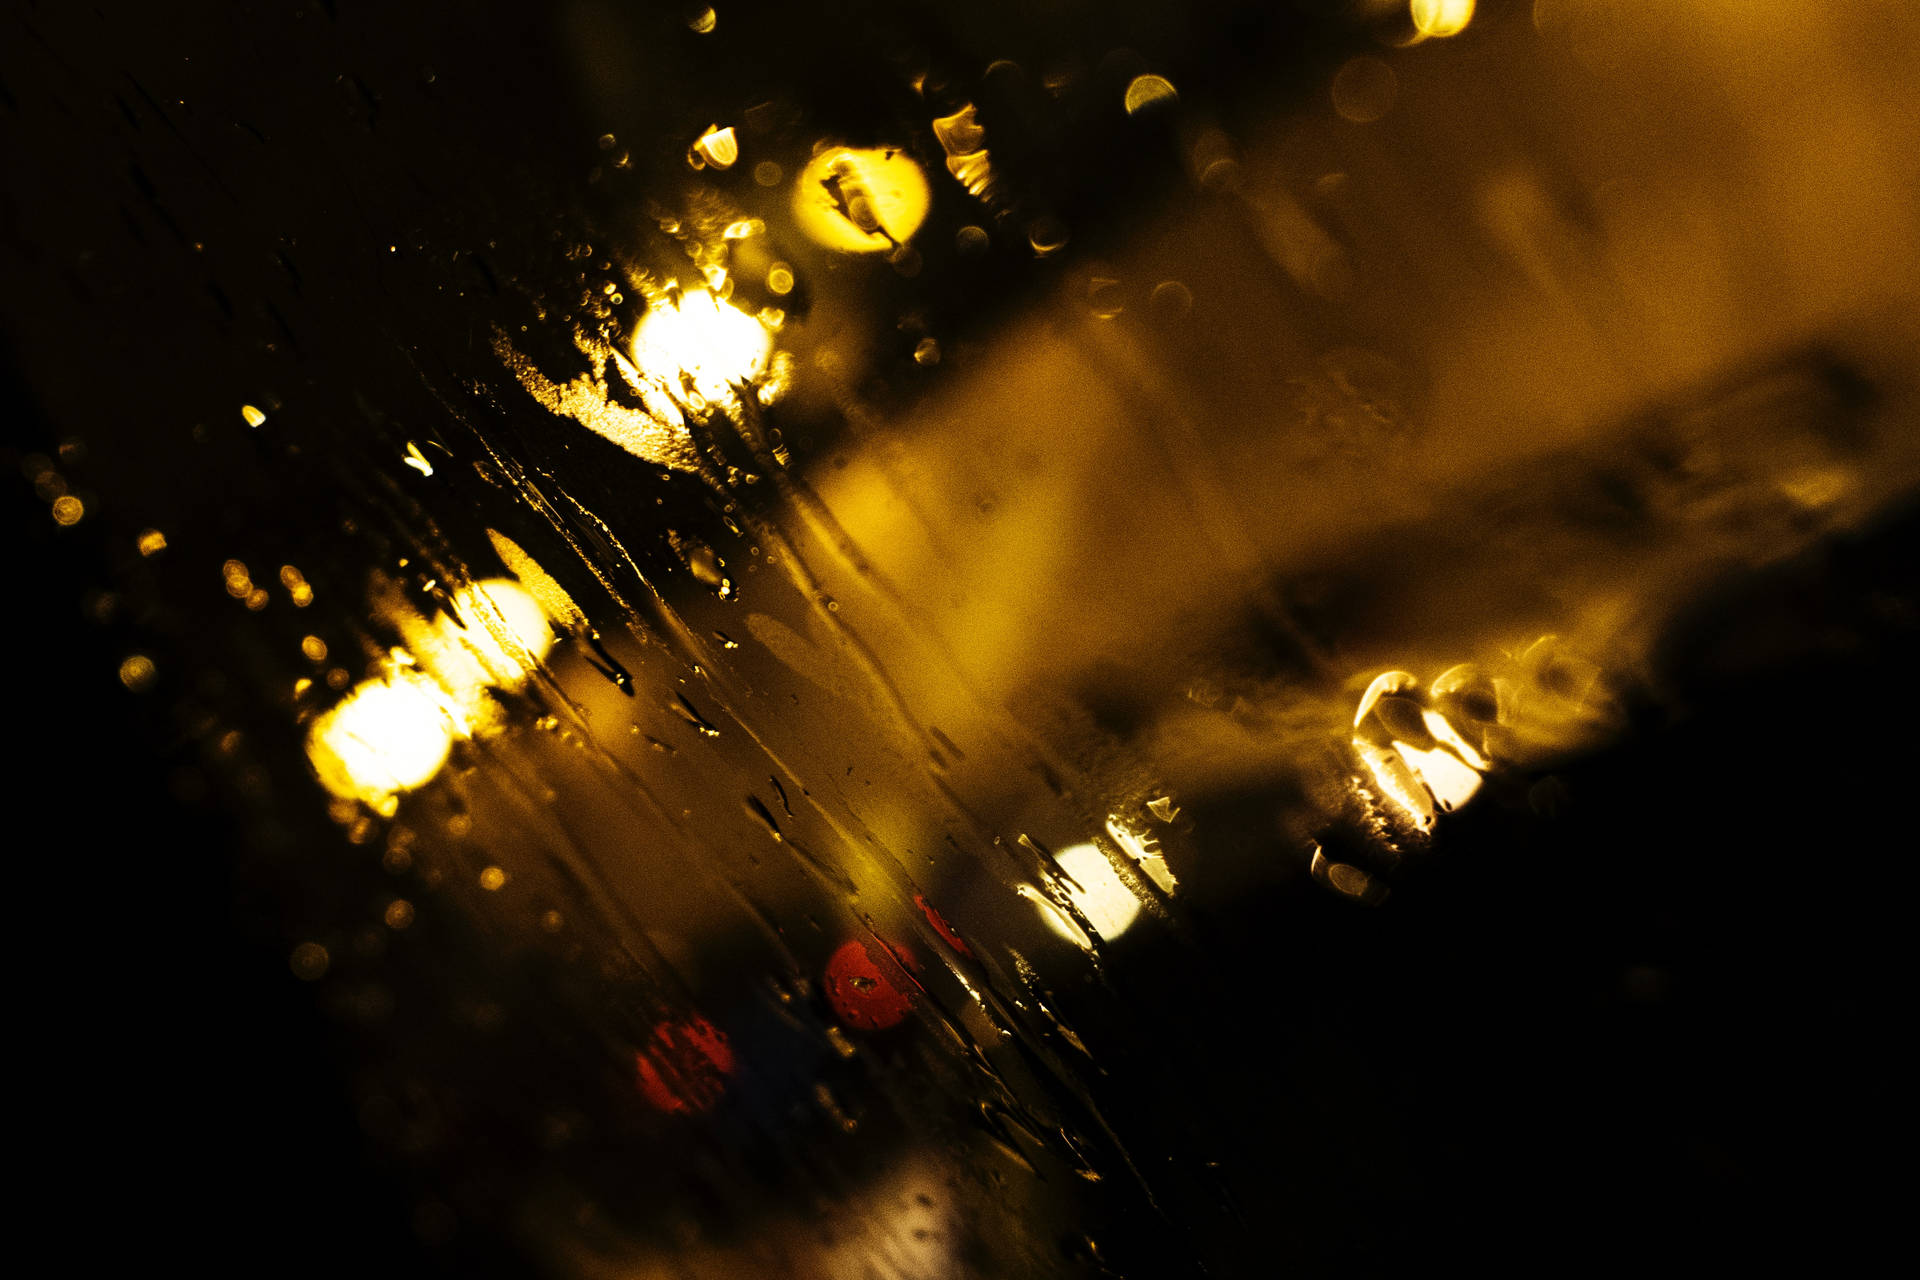 Rain 4002X2668 Wallpaper and Background Image